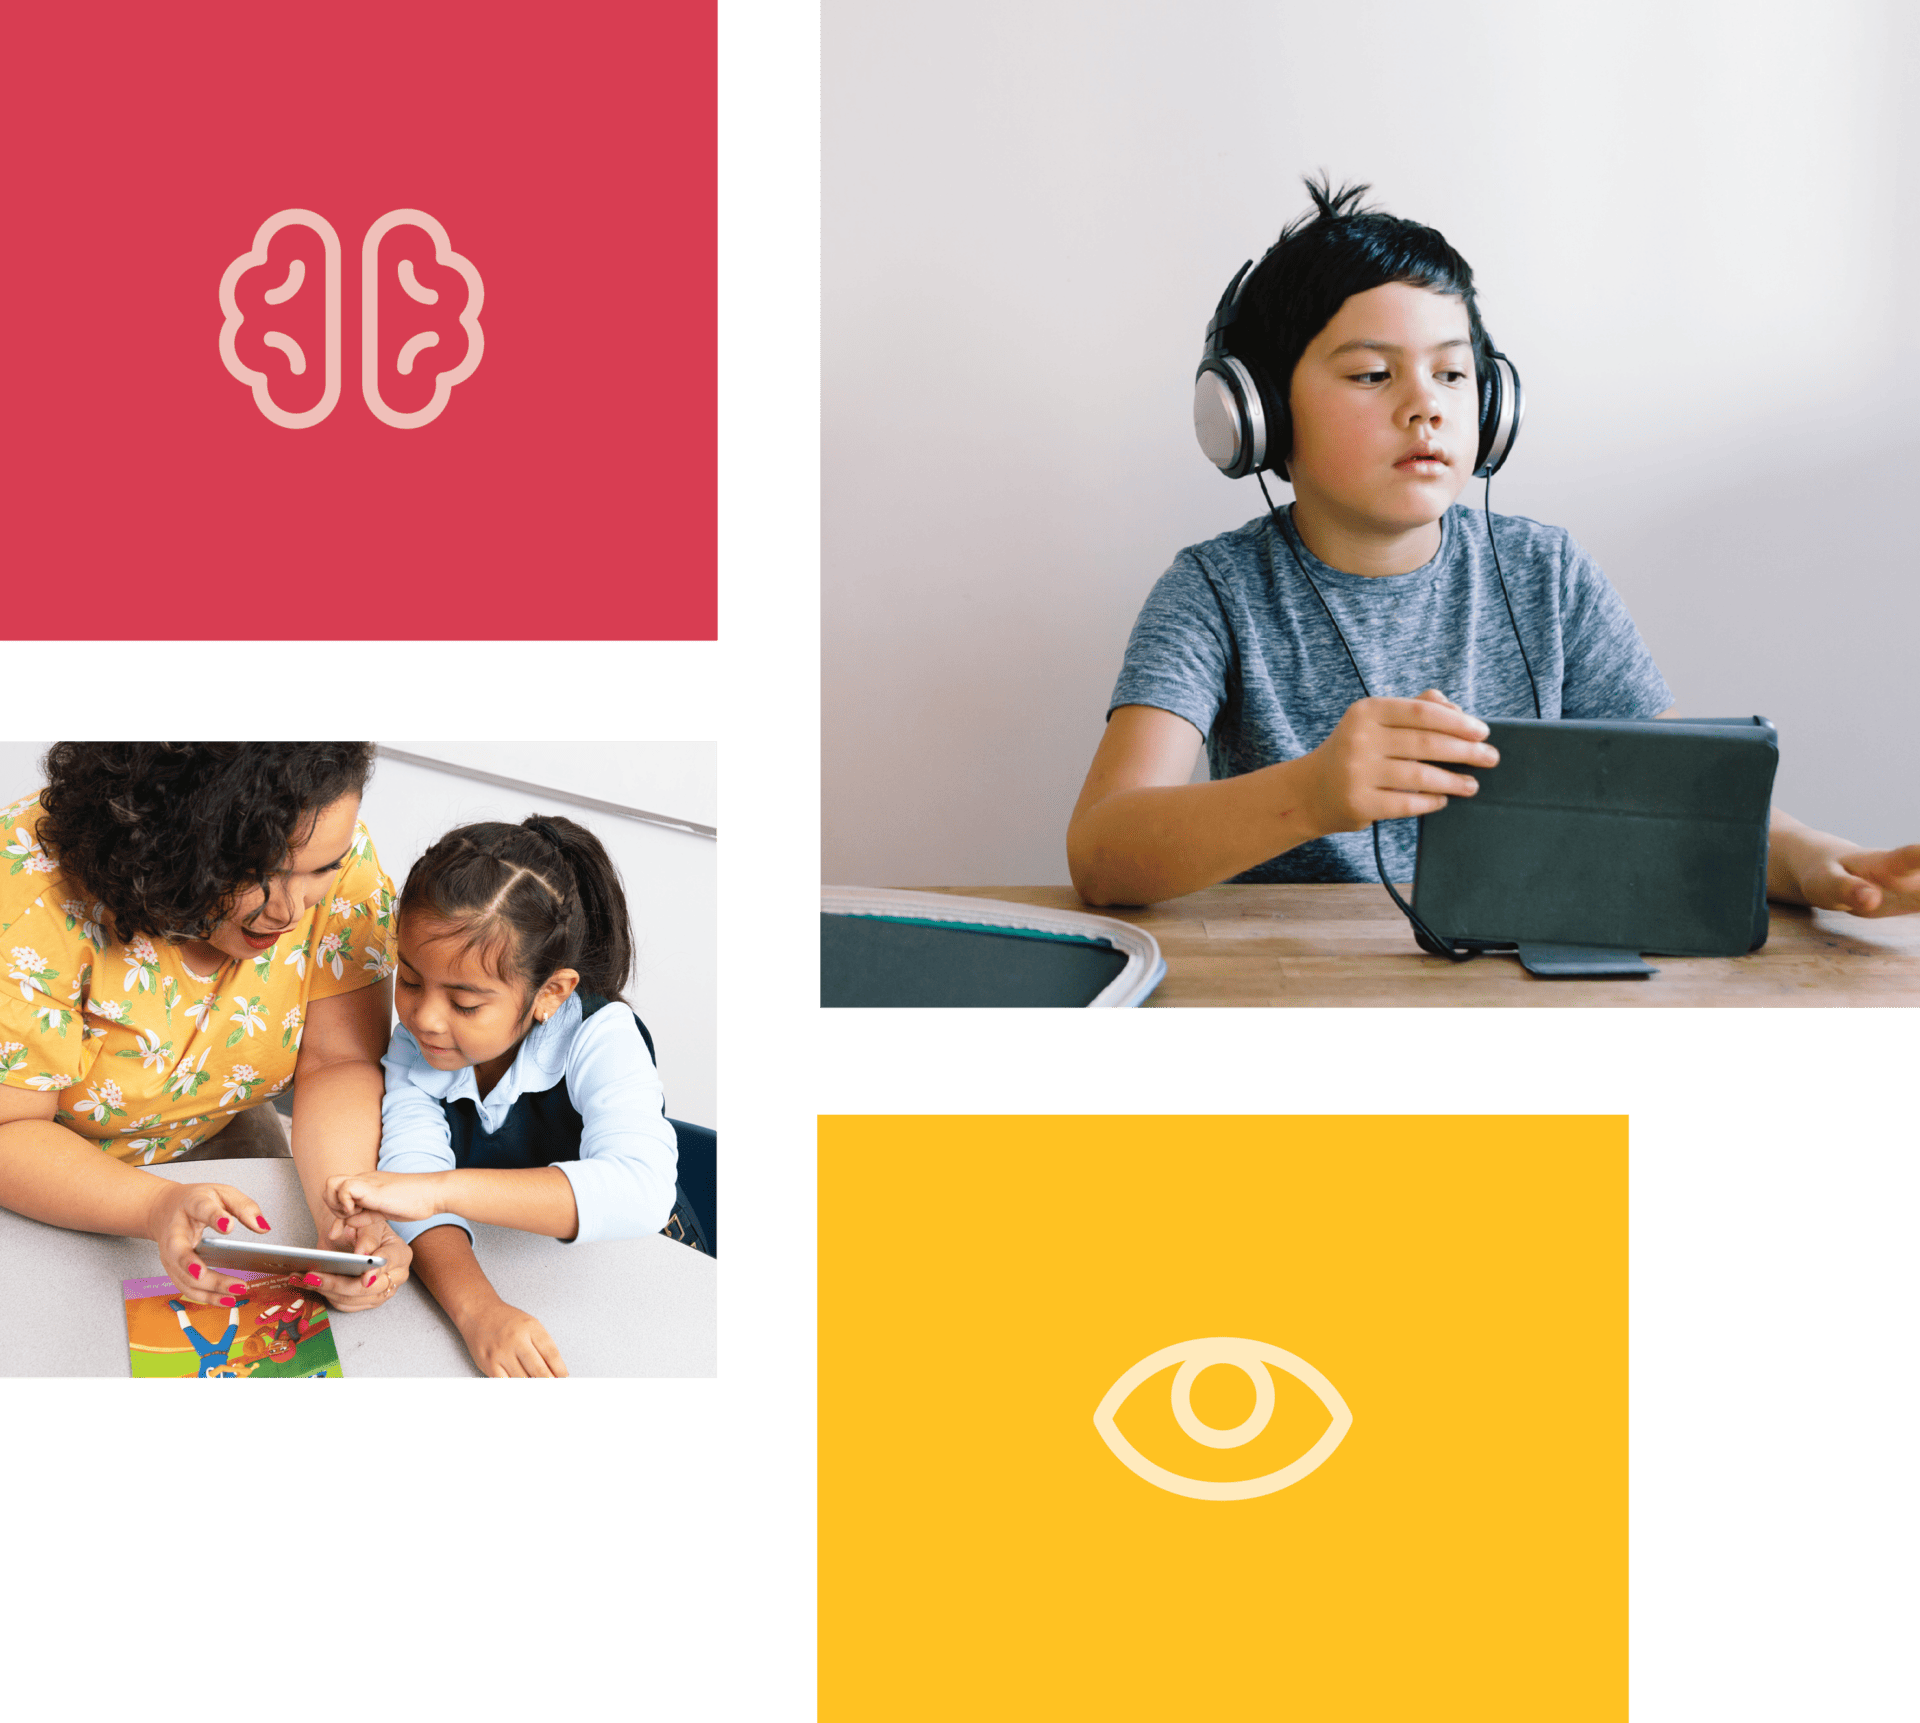 Collage with a logo on red background, a boy with headphones using a tablet, a woman and girl using a smartphone, and an eye icon representing the University of Oregon on yellow background.